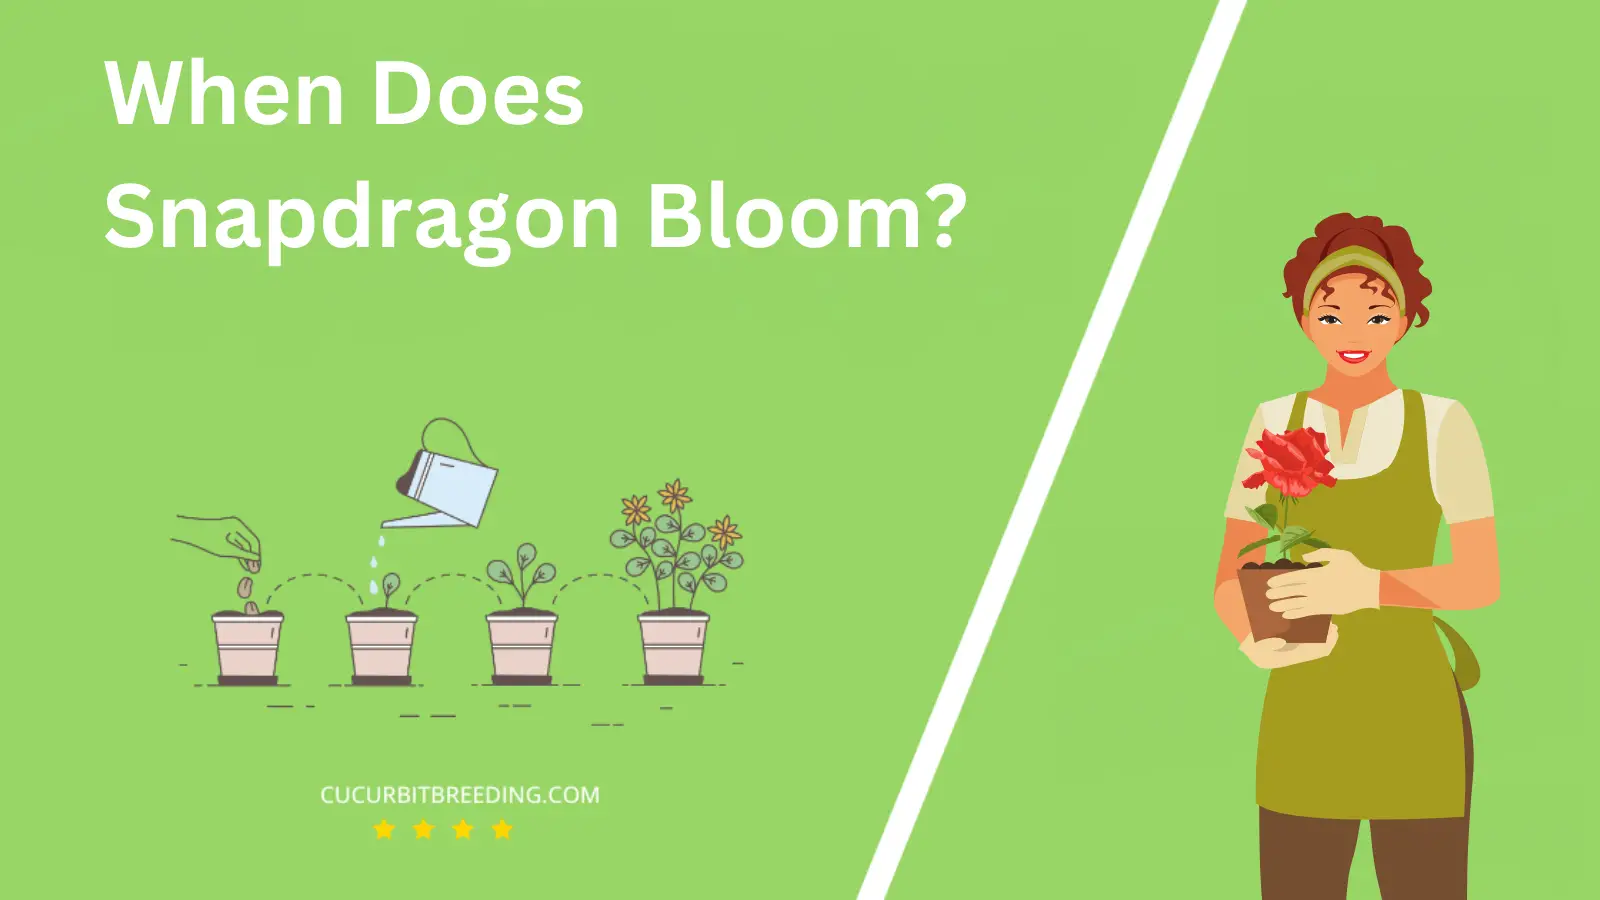 When Does Snapdragon Bloom?